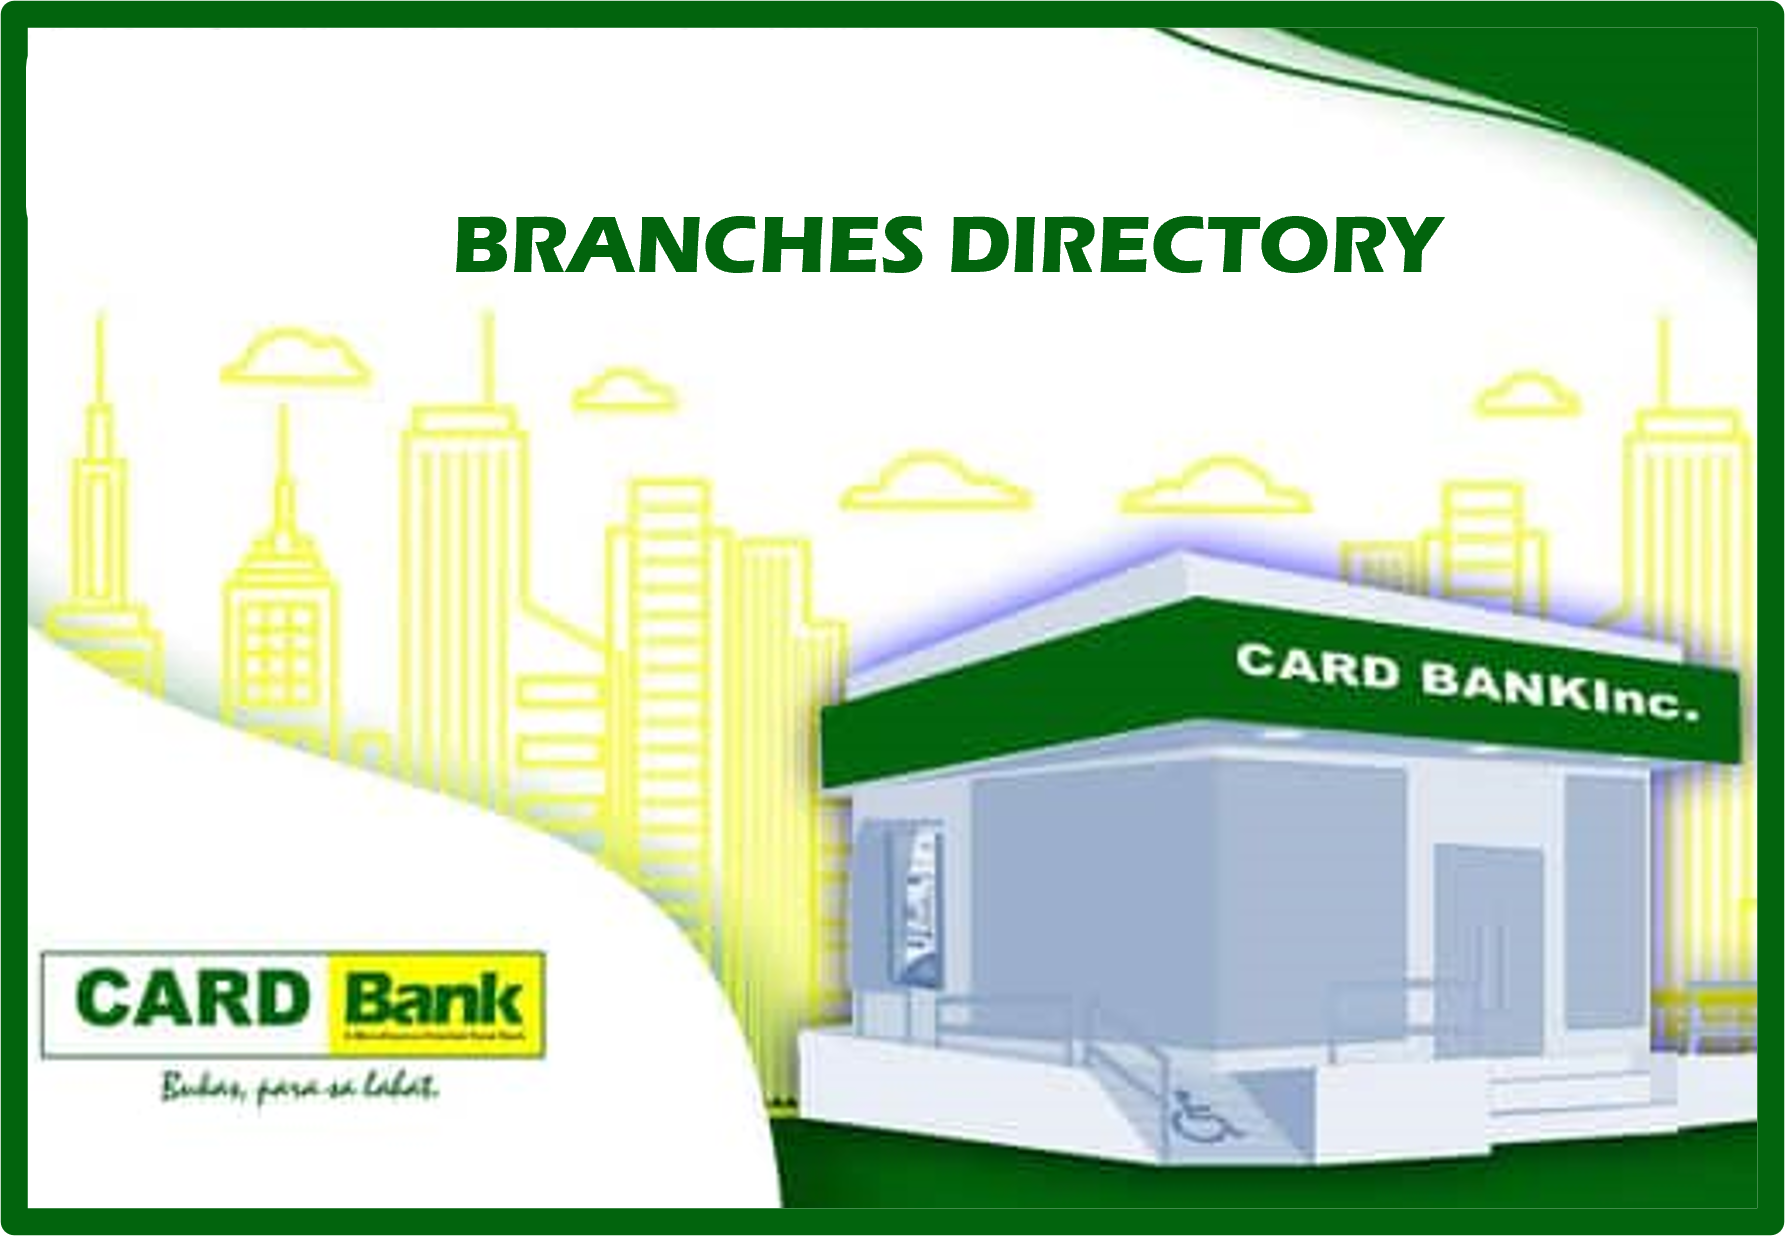 CARD BANK BRANCHES DIRECTORY